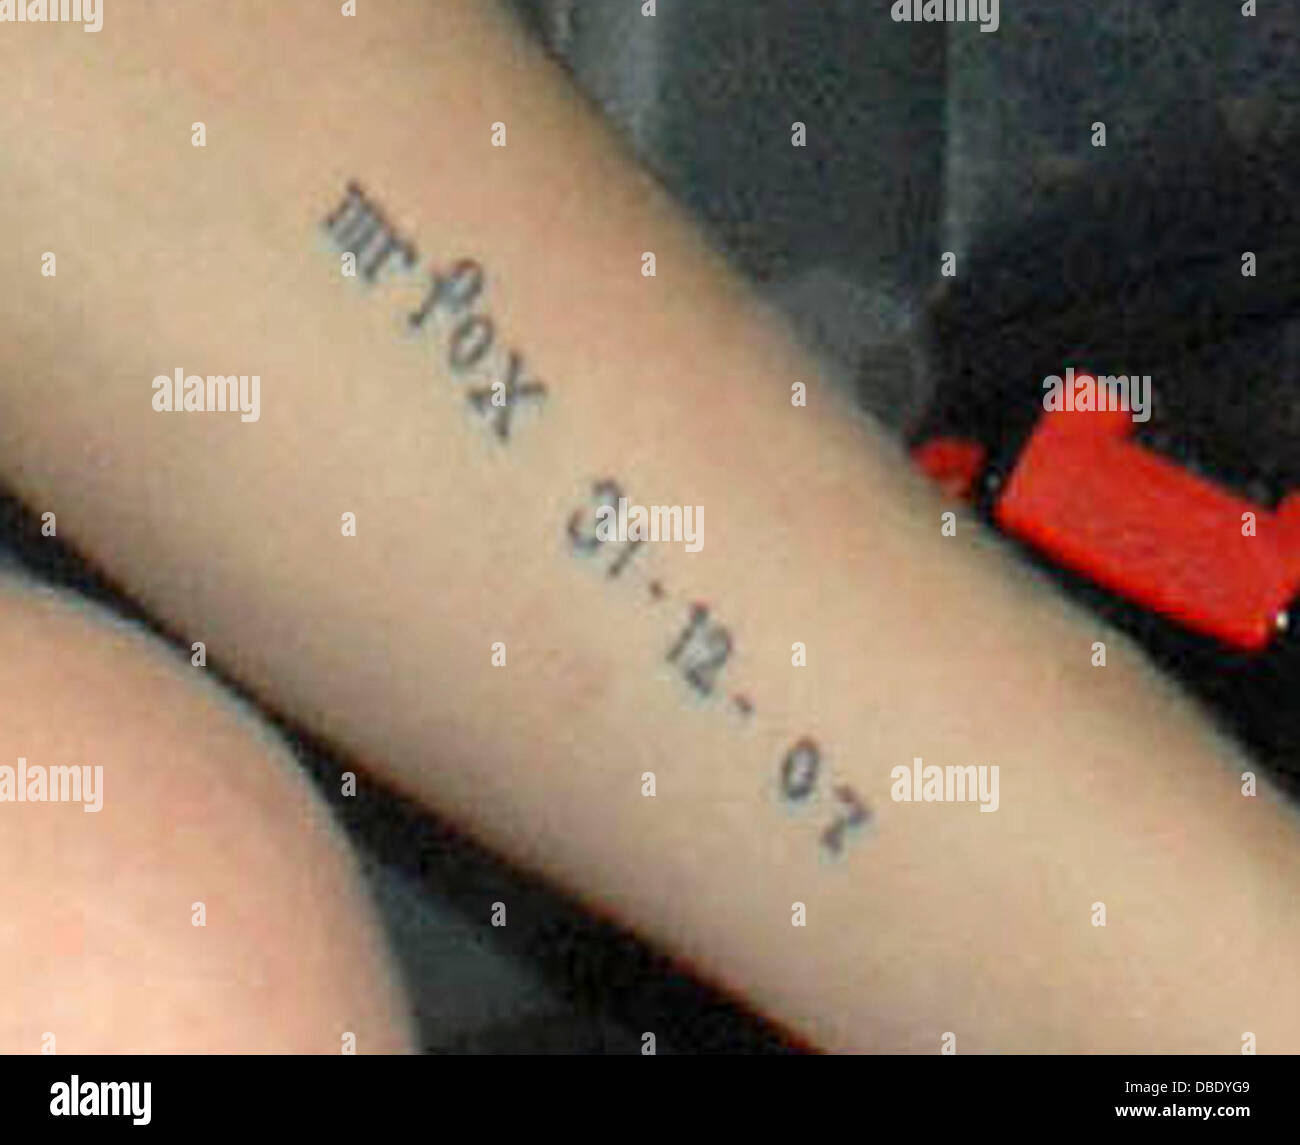 Billie Piper Arm Tattoo Mr Fox 31 12 07 The Date She Married Her Husband Laurence Fox